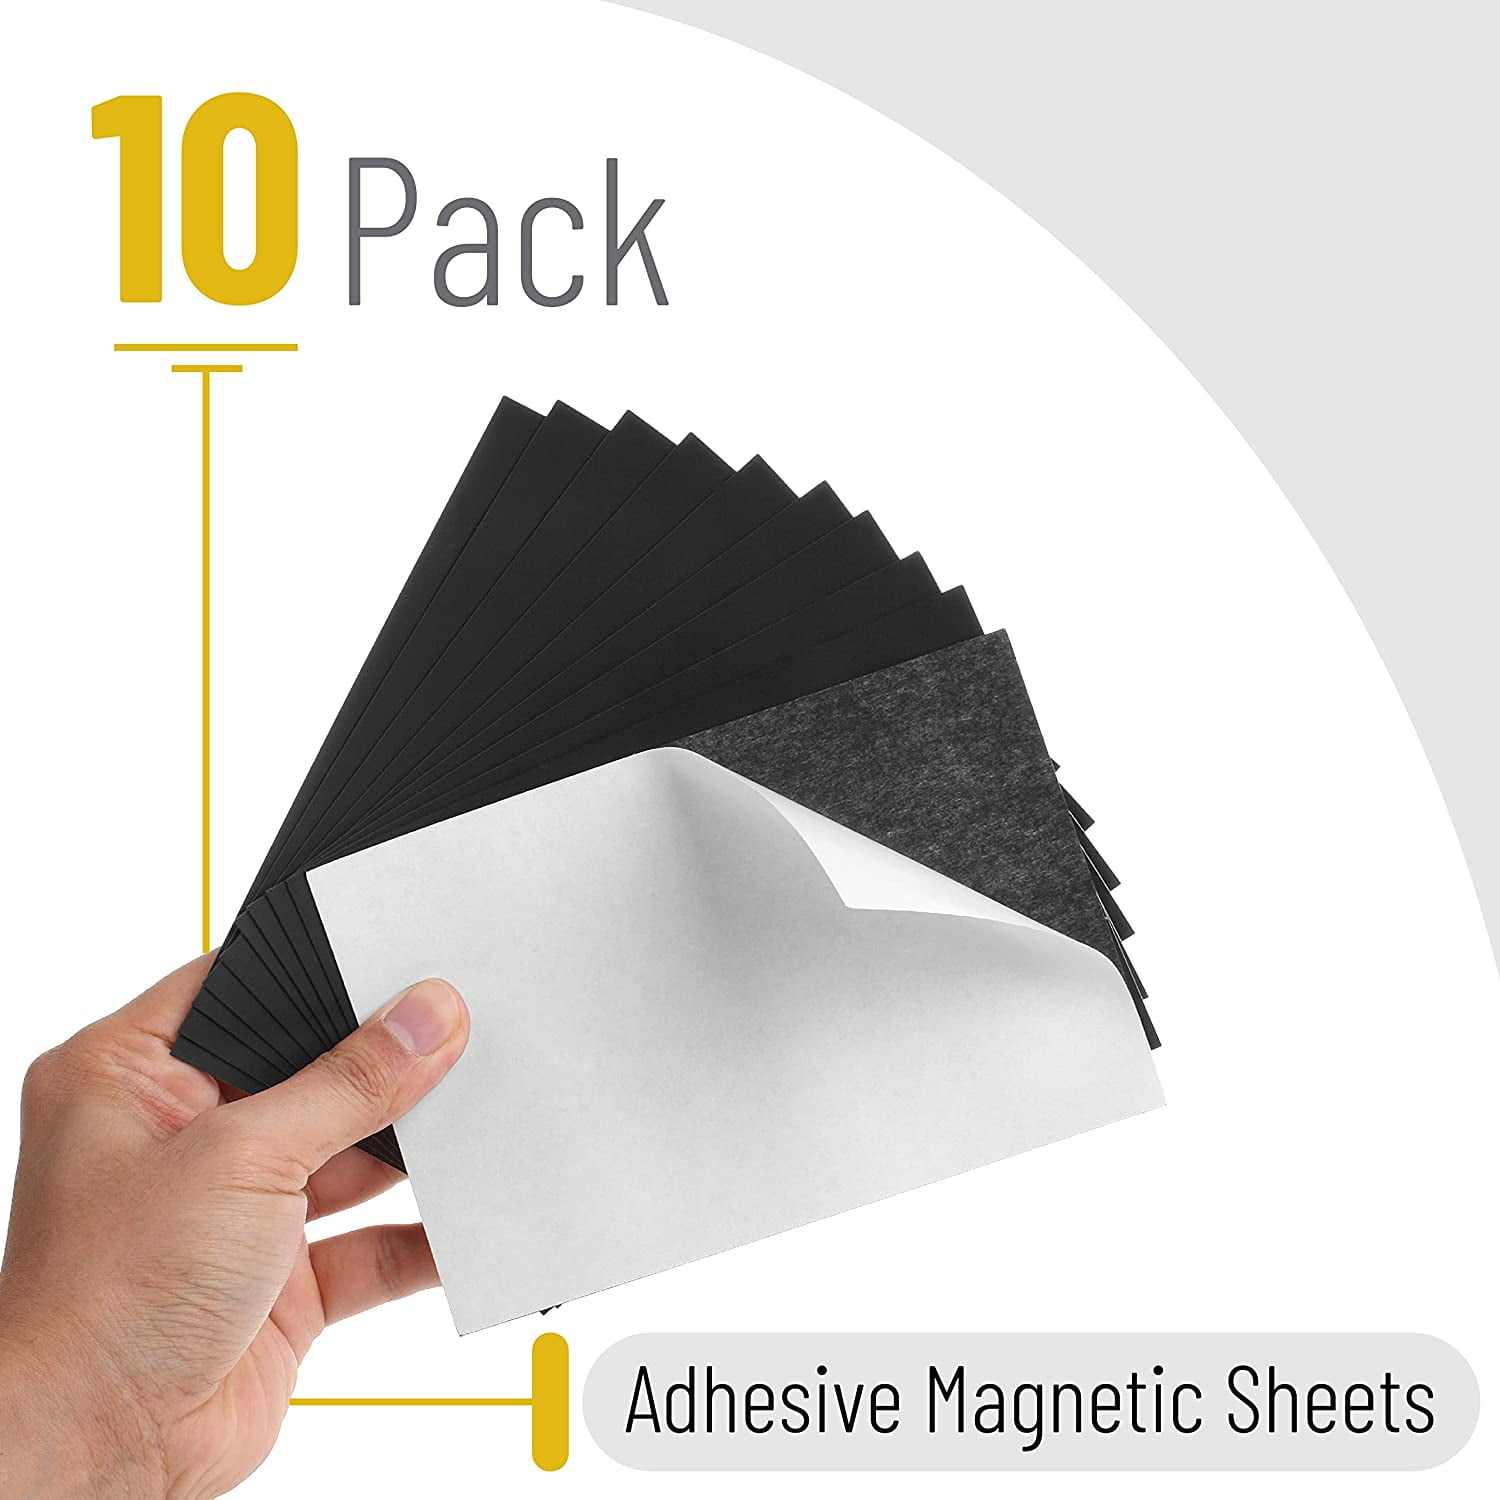 Kedudes Magnetic Sheet with Adhesive Backing, Cut & Customizable Self Adhesive Magnetic Sheets, Variety of 8x10, 5x7, 4x6 - Great for Crafts, or